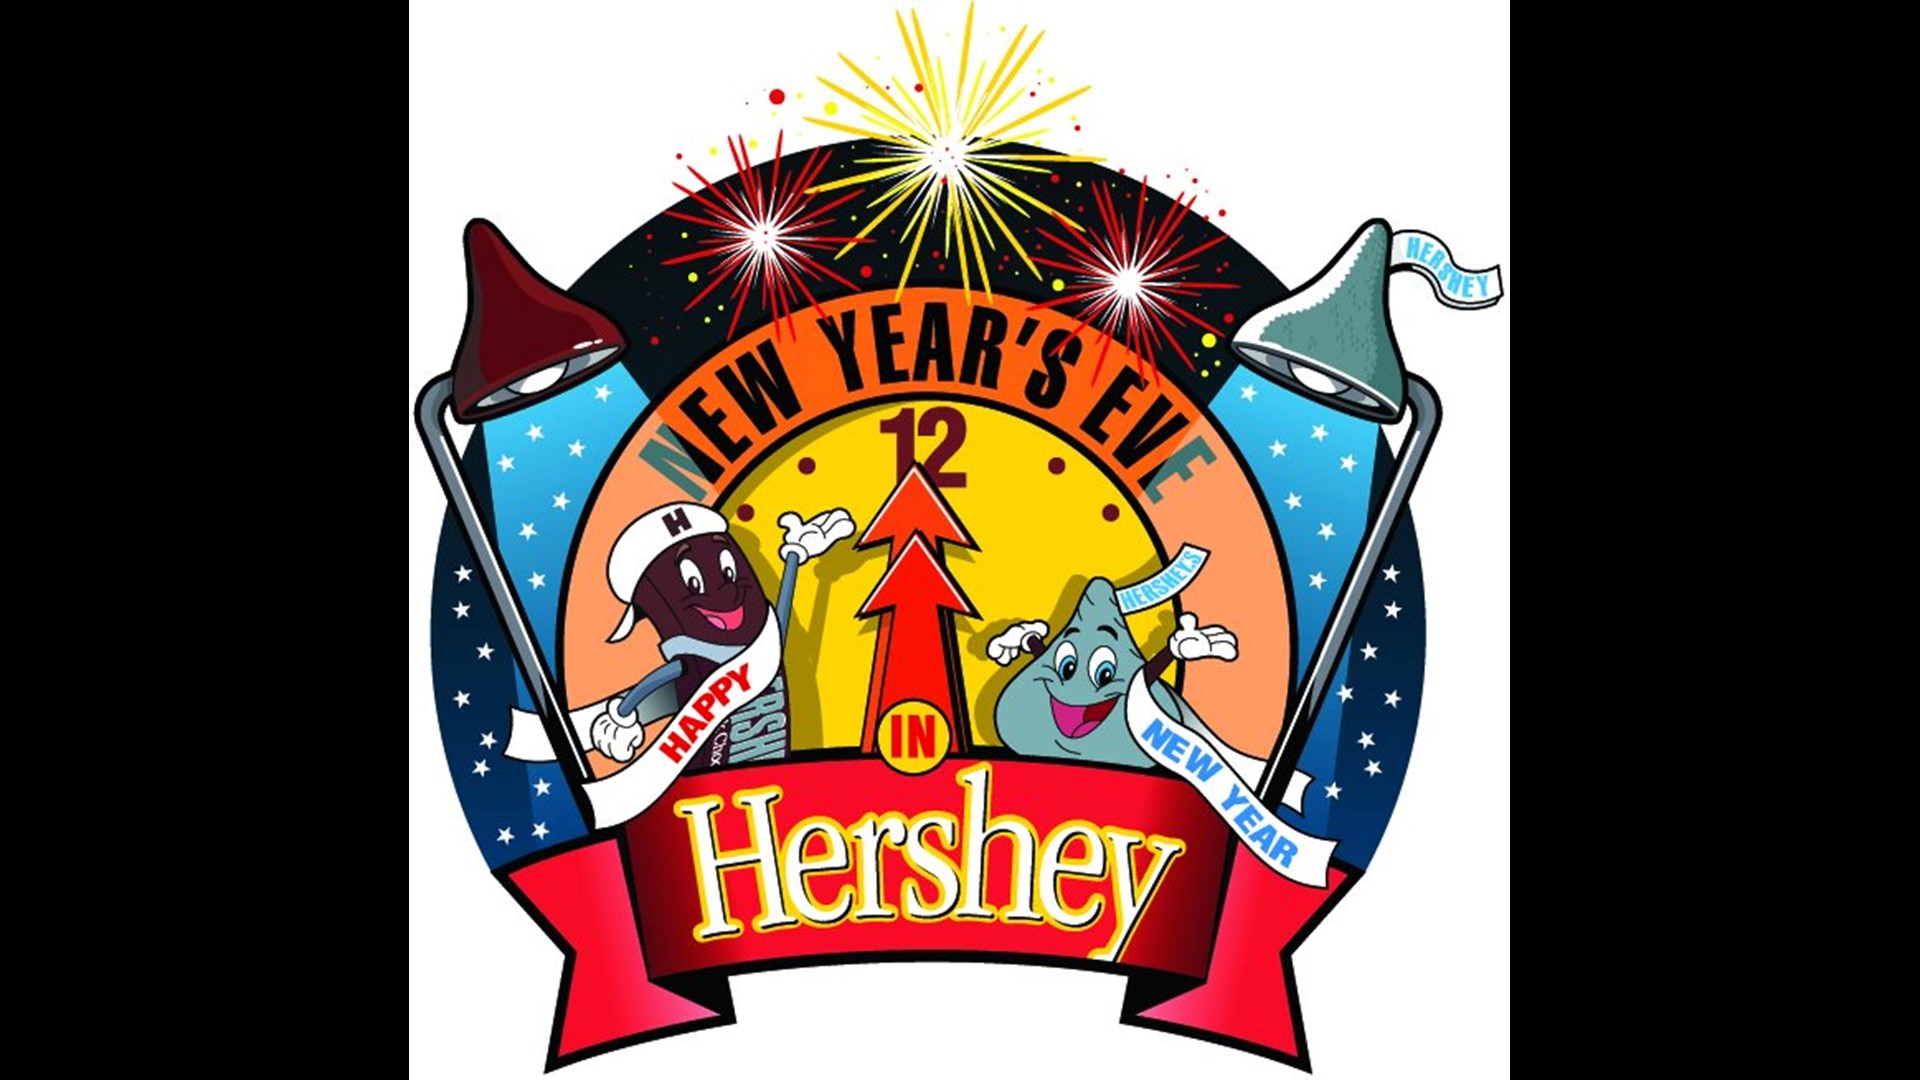 New Year’s Eve in Hershey 2020 Preview